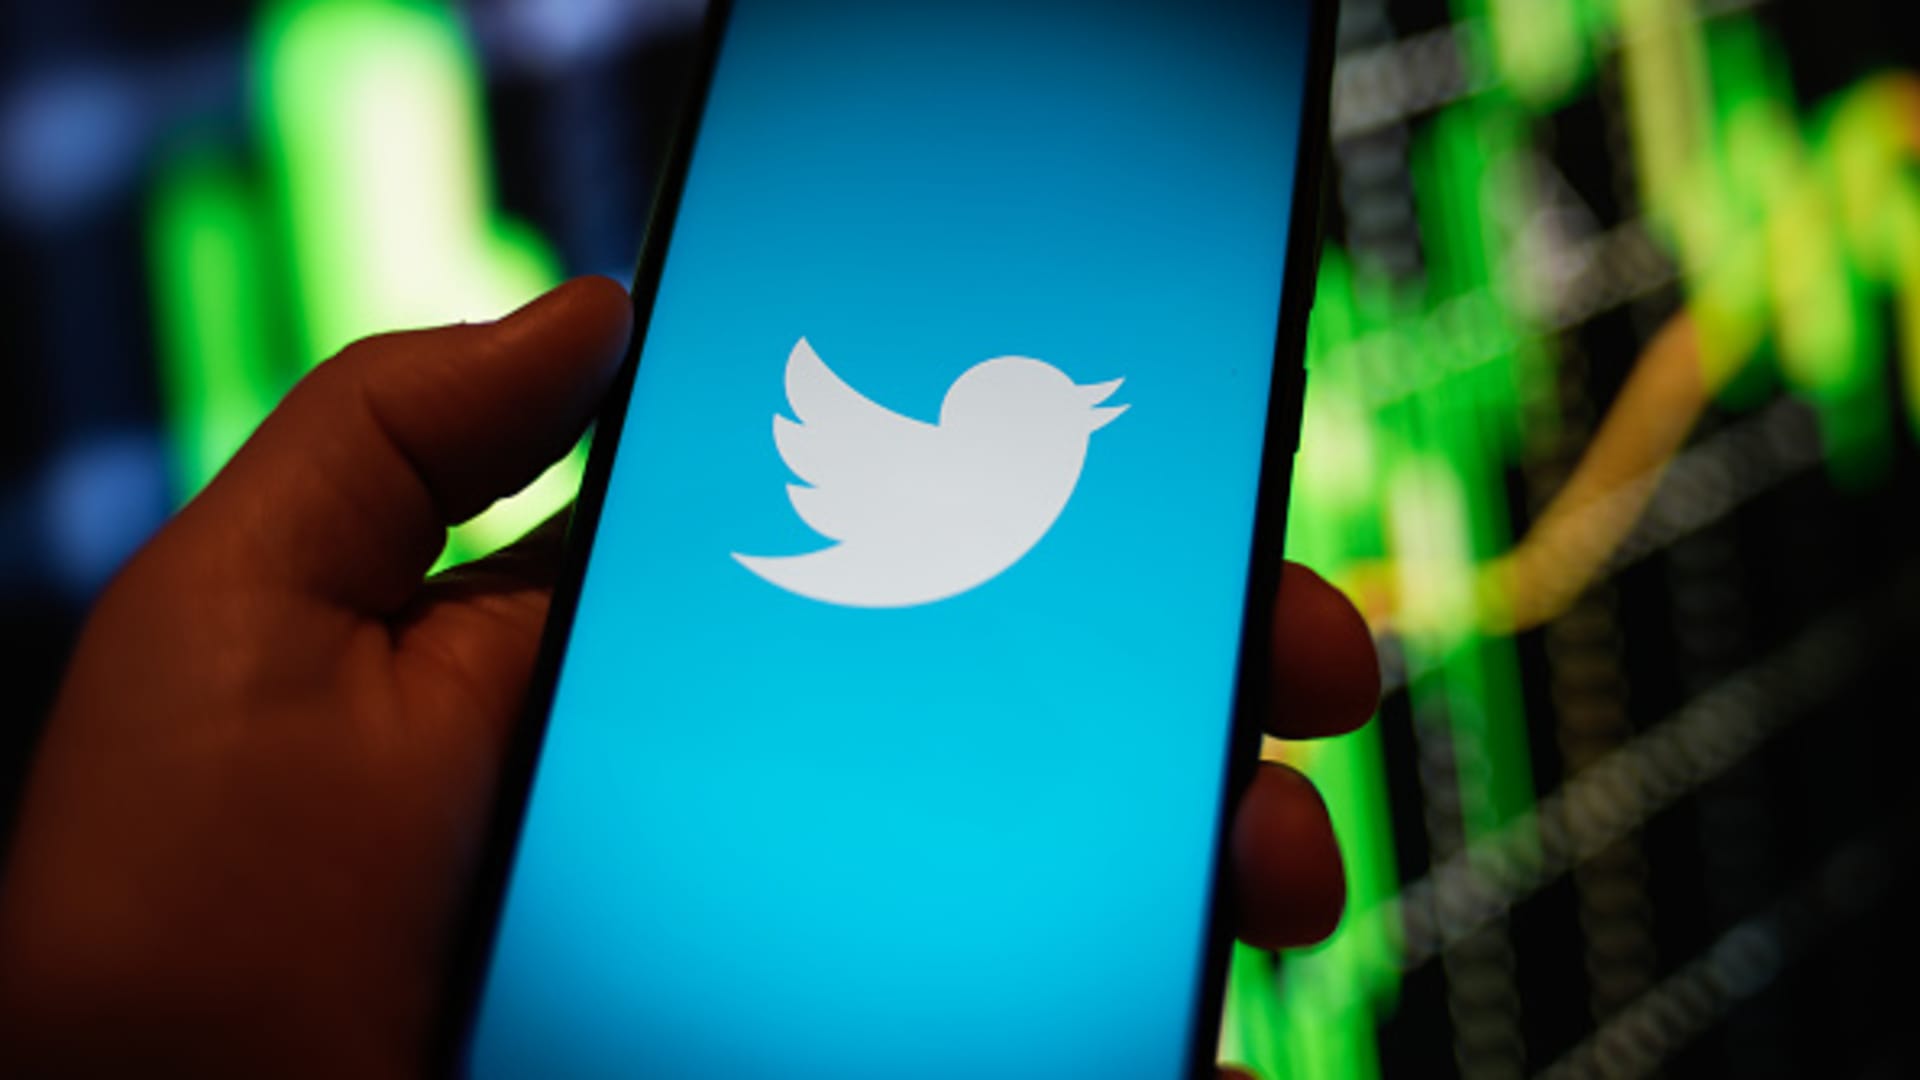 Twitter will finally let you edit tweets later this month — if you’re a paid subscriber